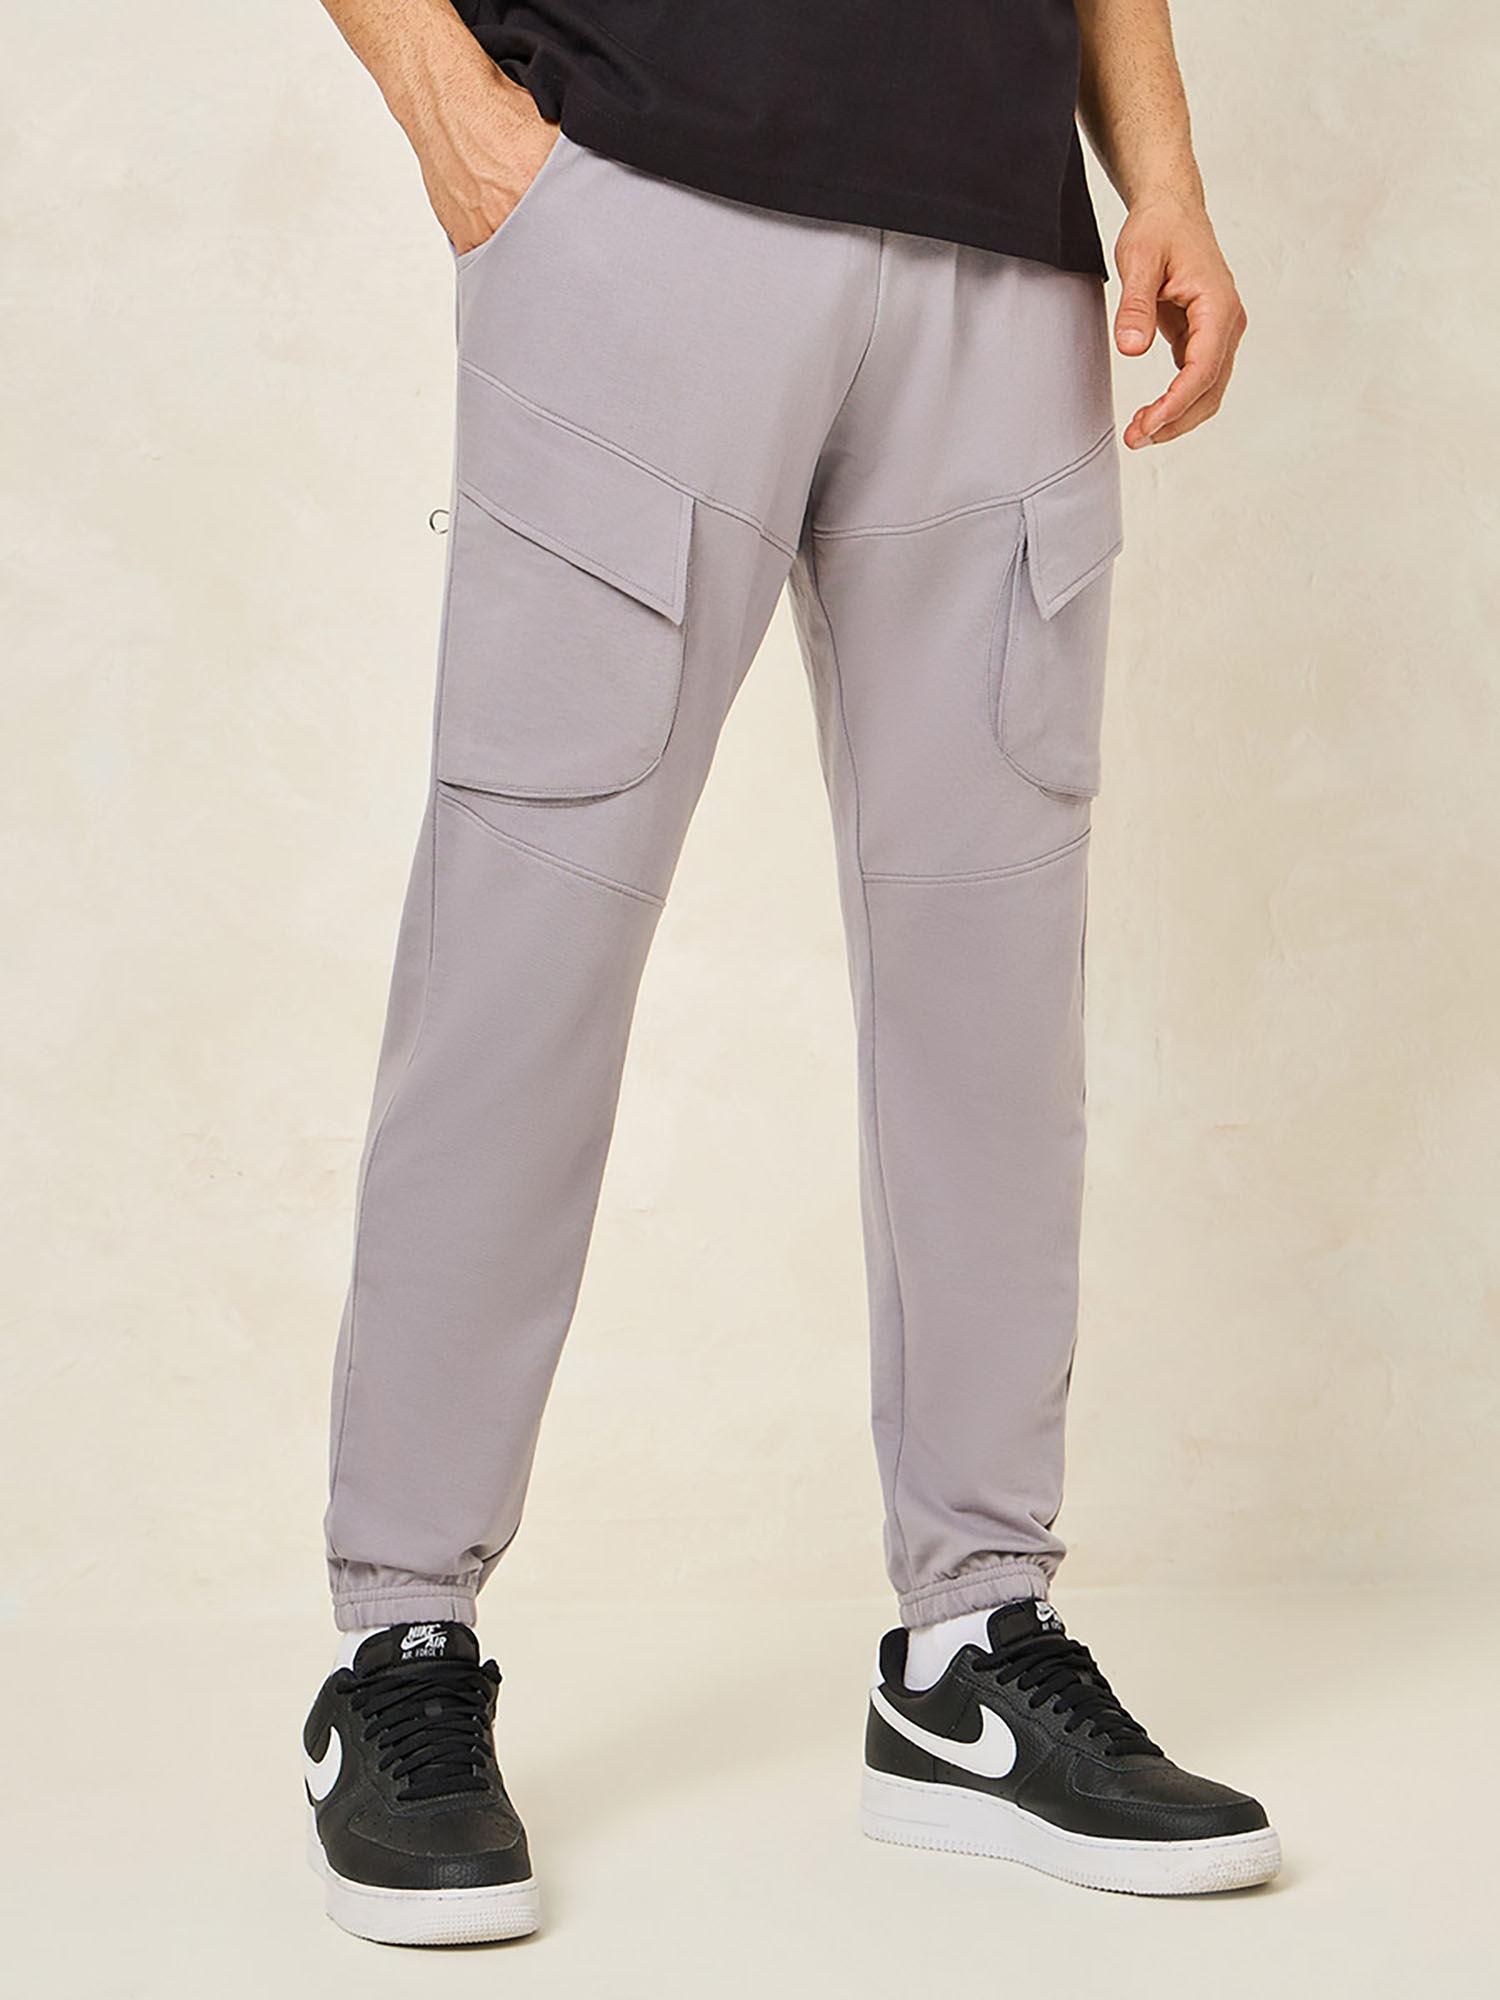 mens grey cotton blend slim fit cargo joggers with drawstring